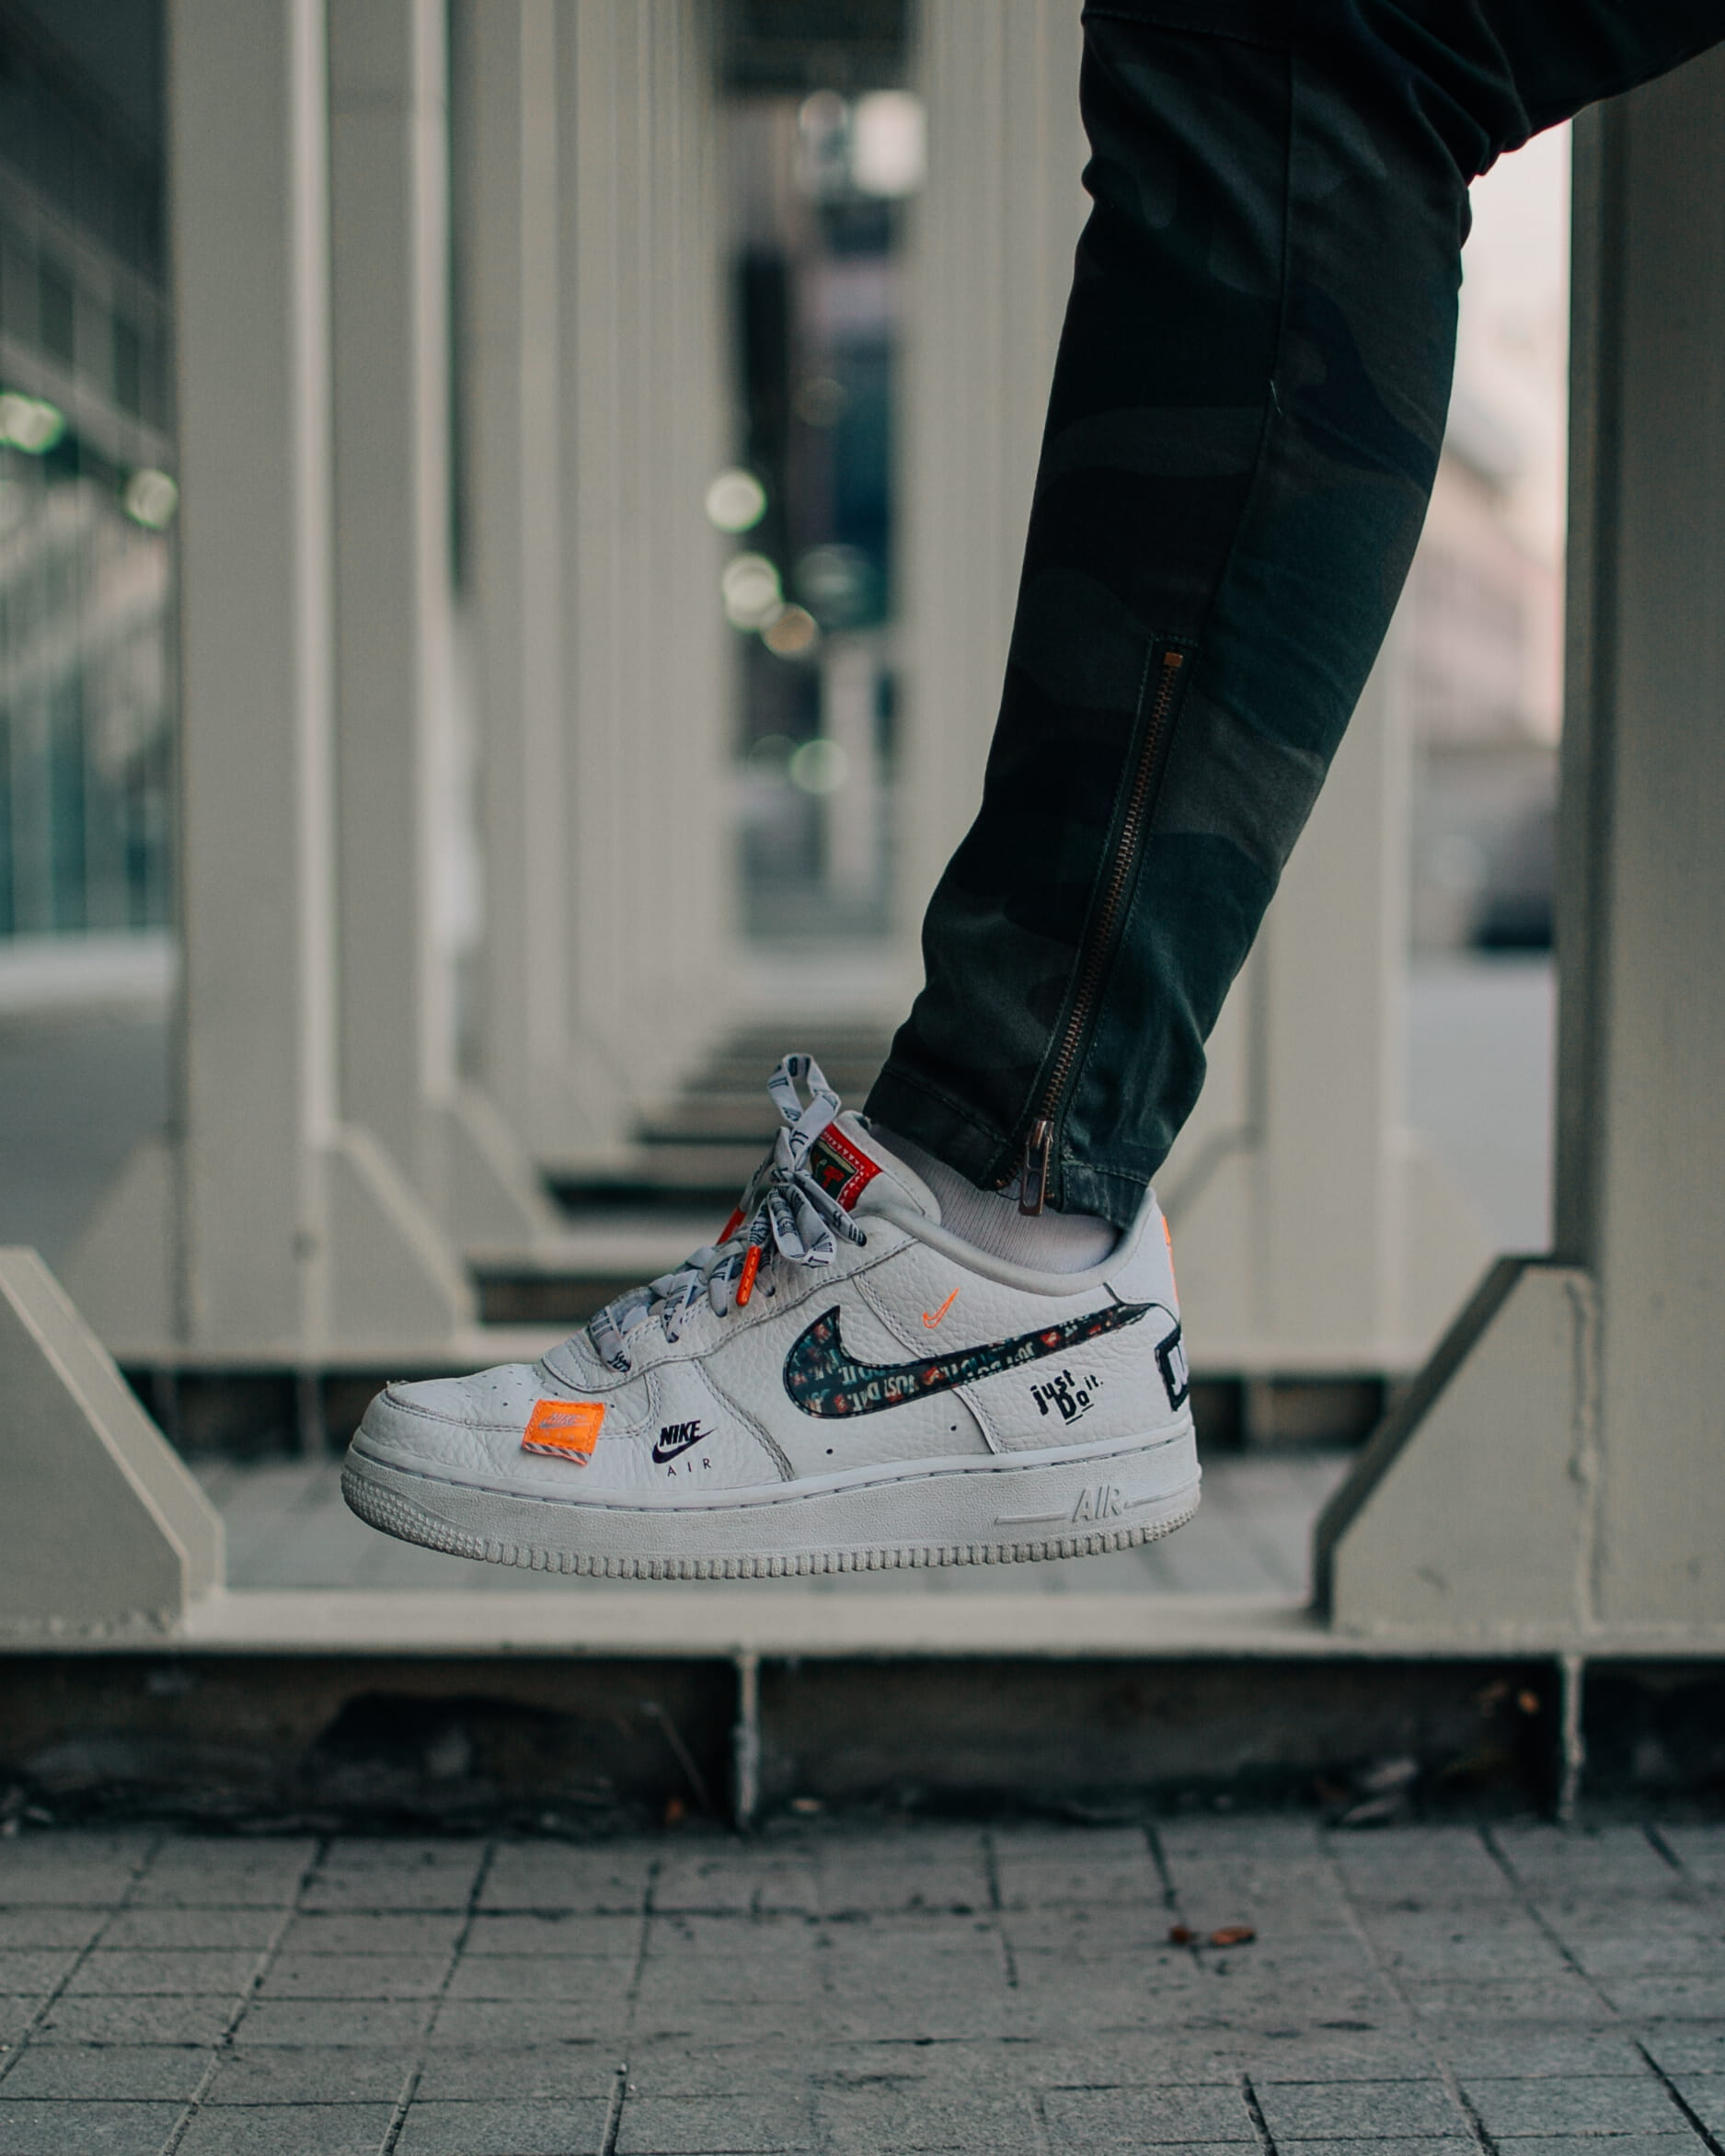 Wallpaper Selective Focus Photography Of Person Wearing Nike Air Force 1 Low Top Shoe